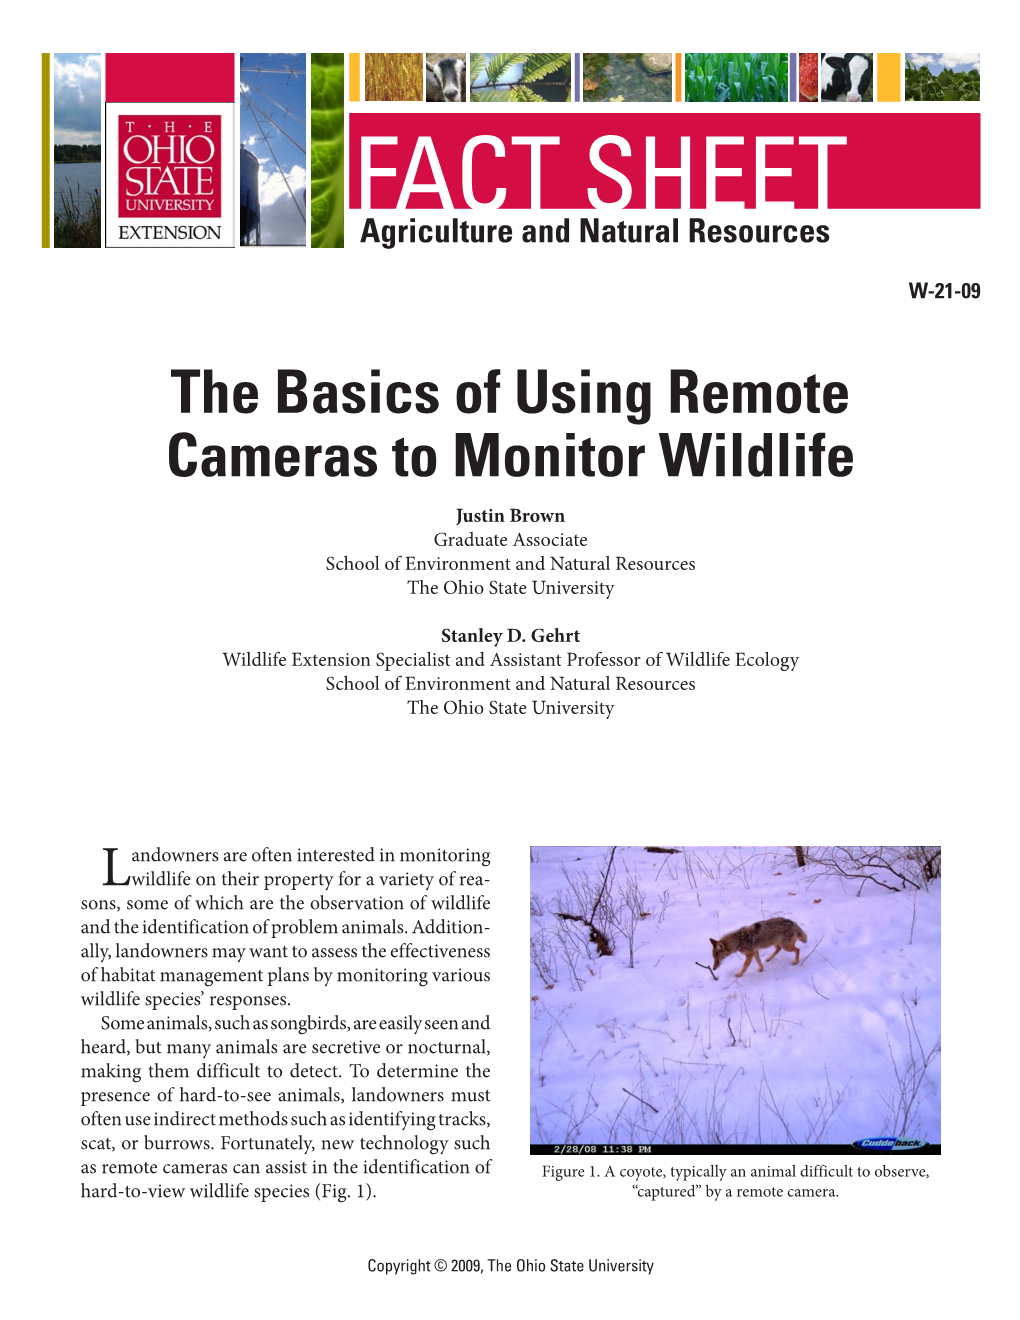 The Basics of Using Remote Cameras to Monitor Wildlife Justin Brown Graduate Associate School of Environment and Natural Resources the Ohio State University